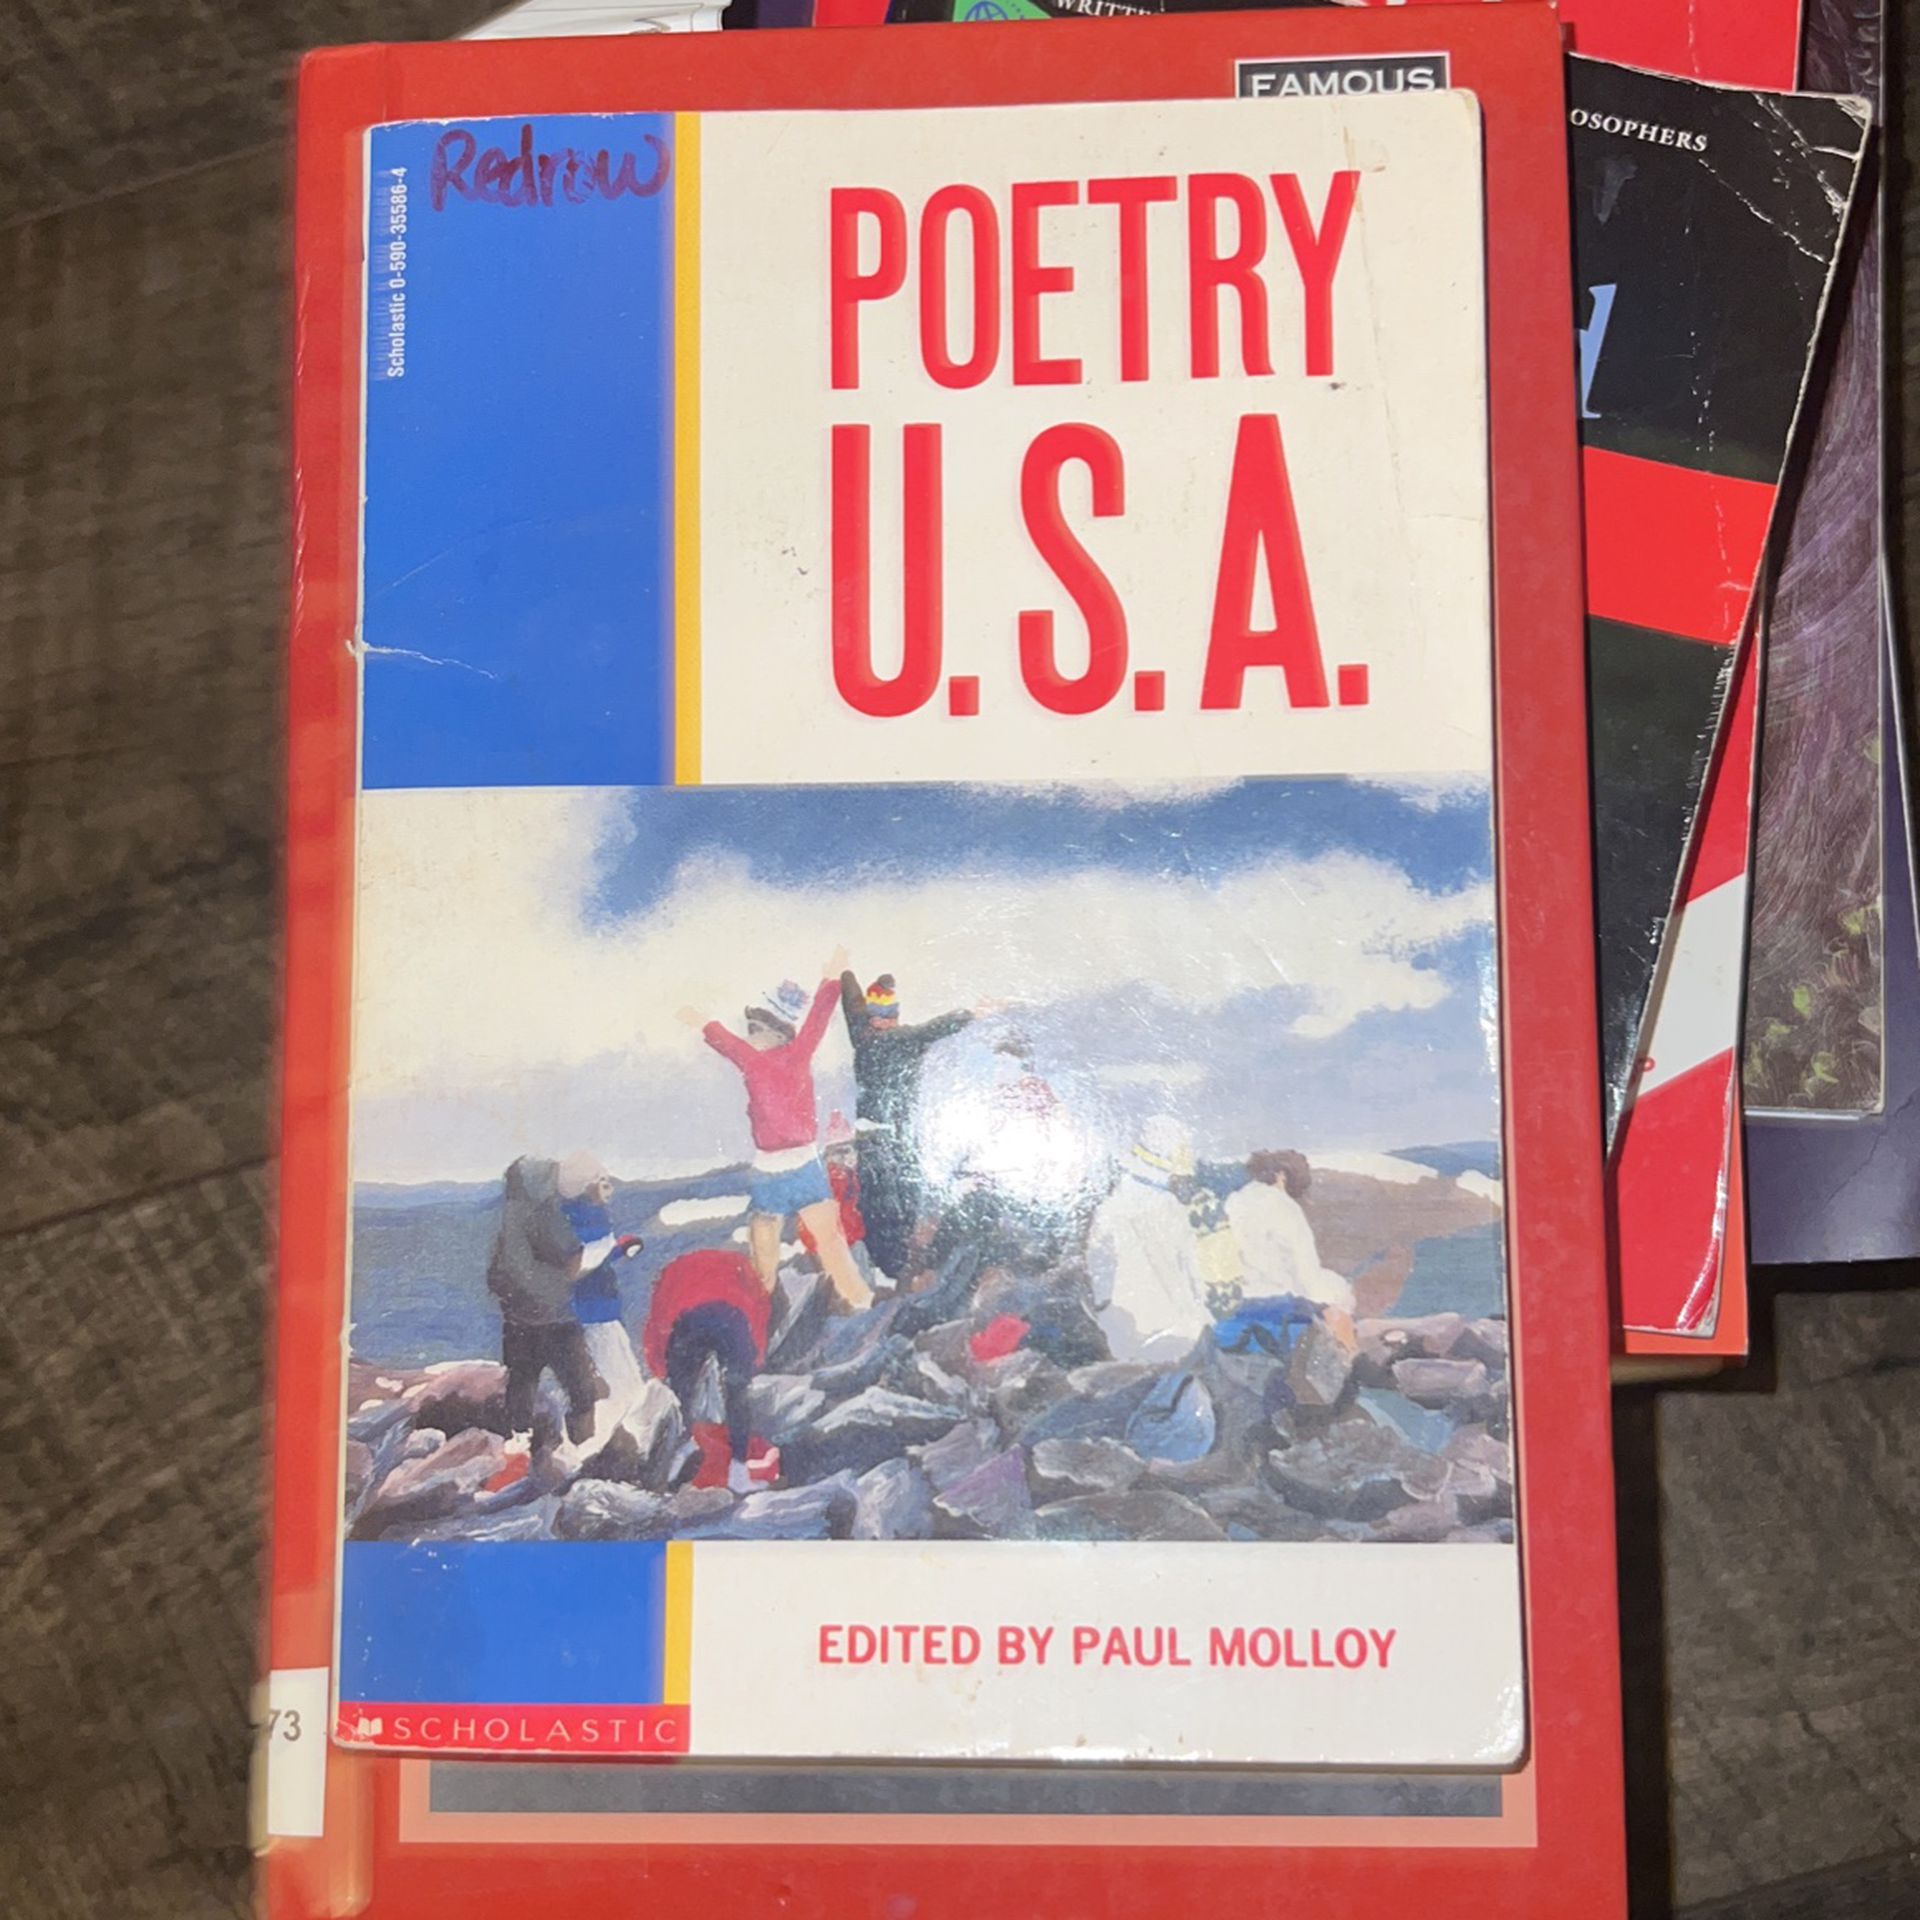 Poetry U.S.A